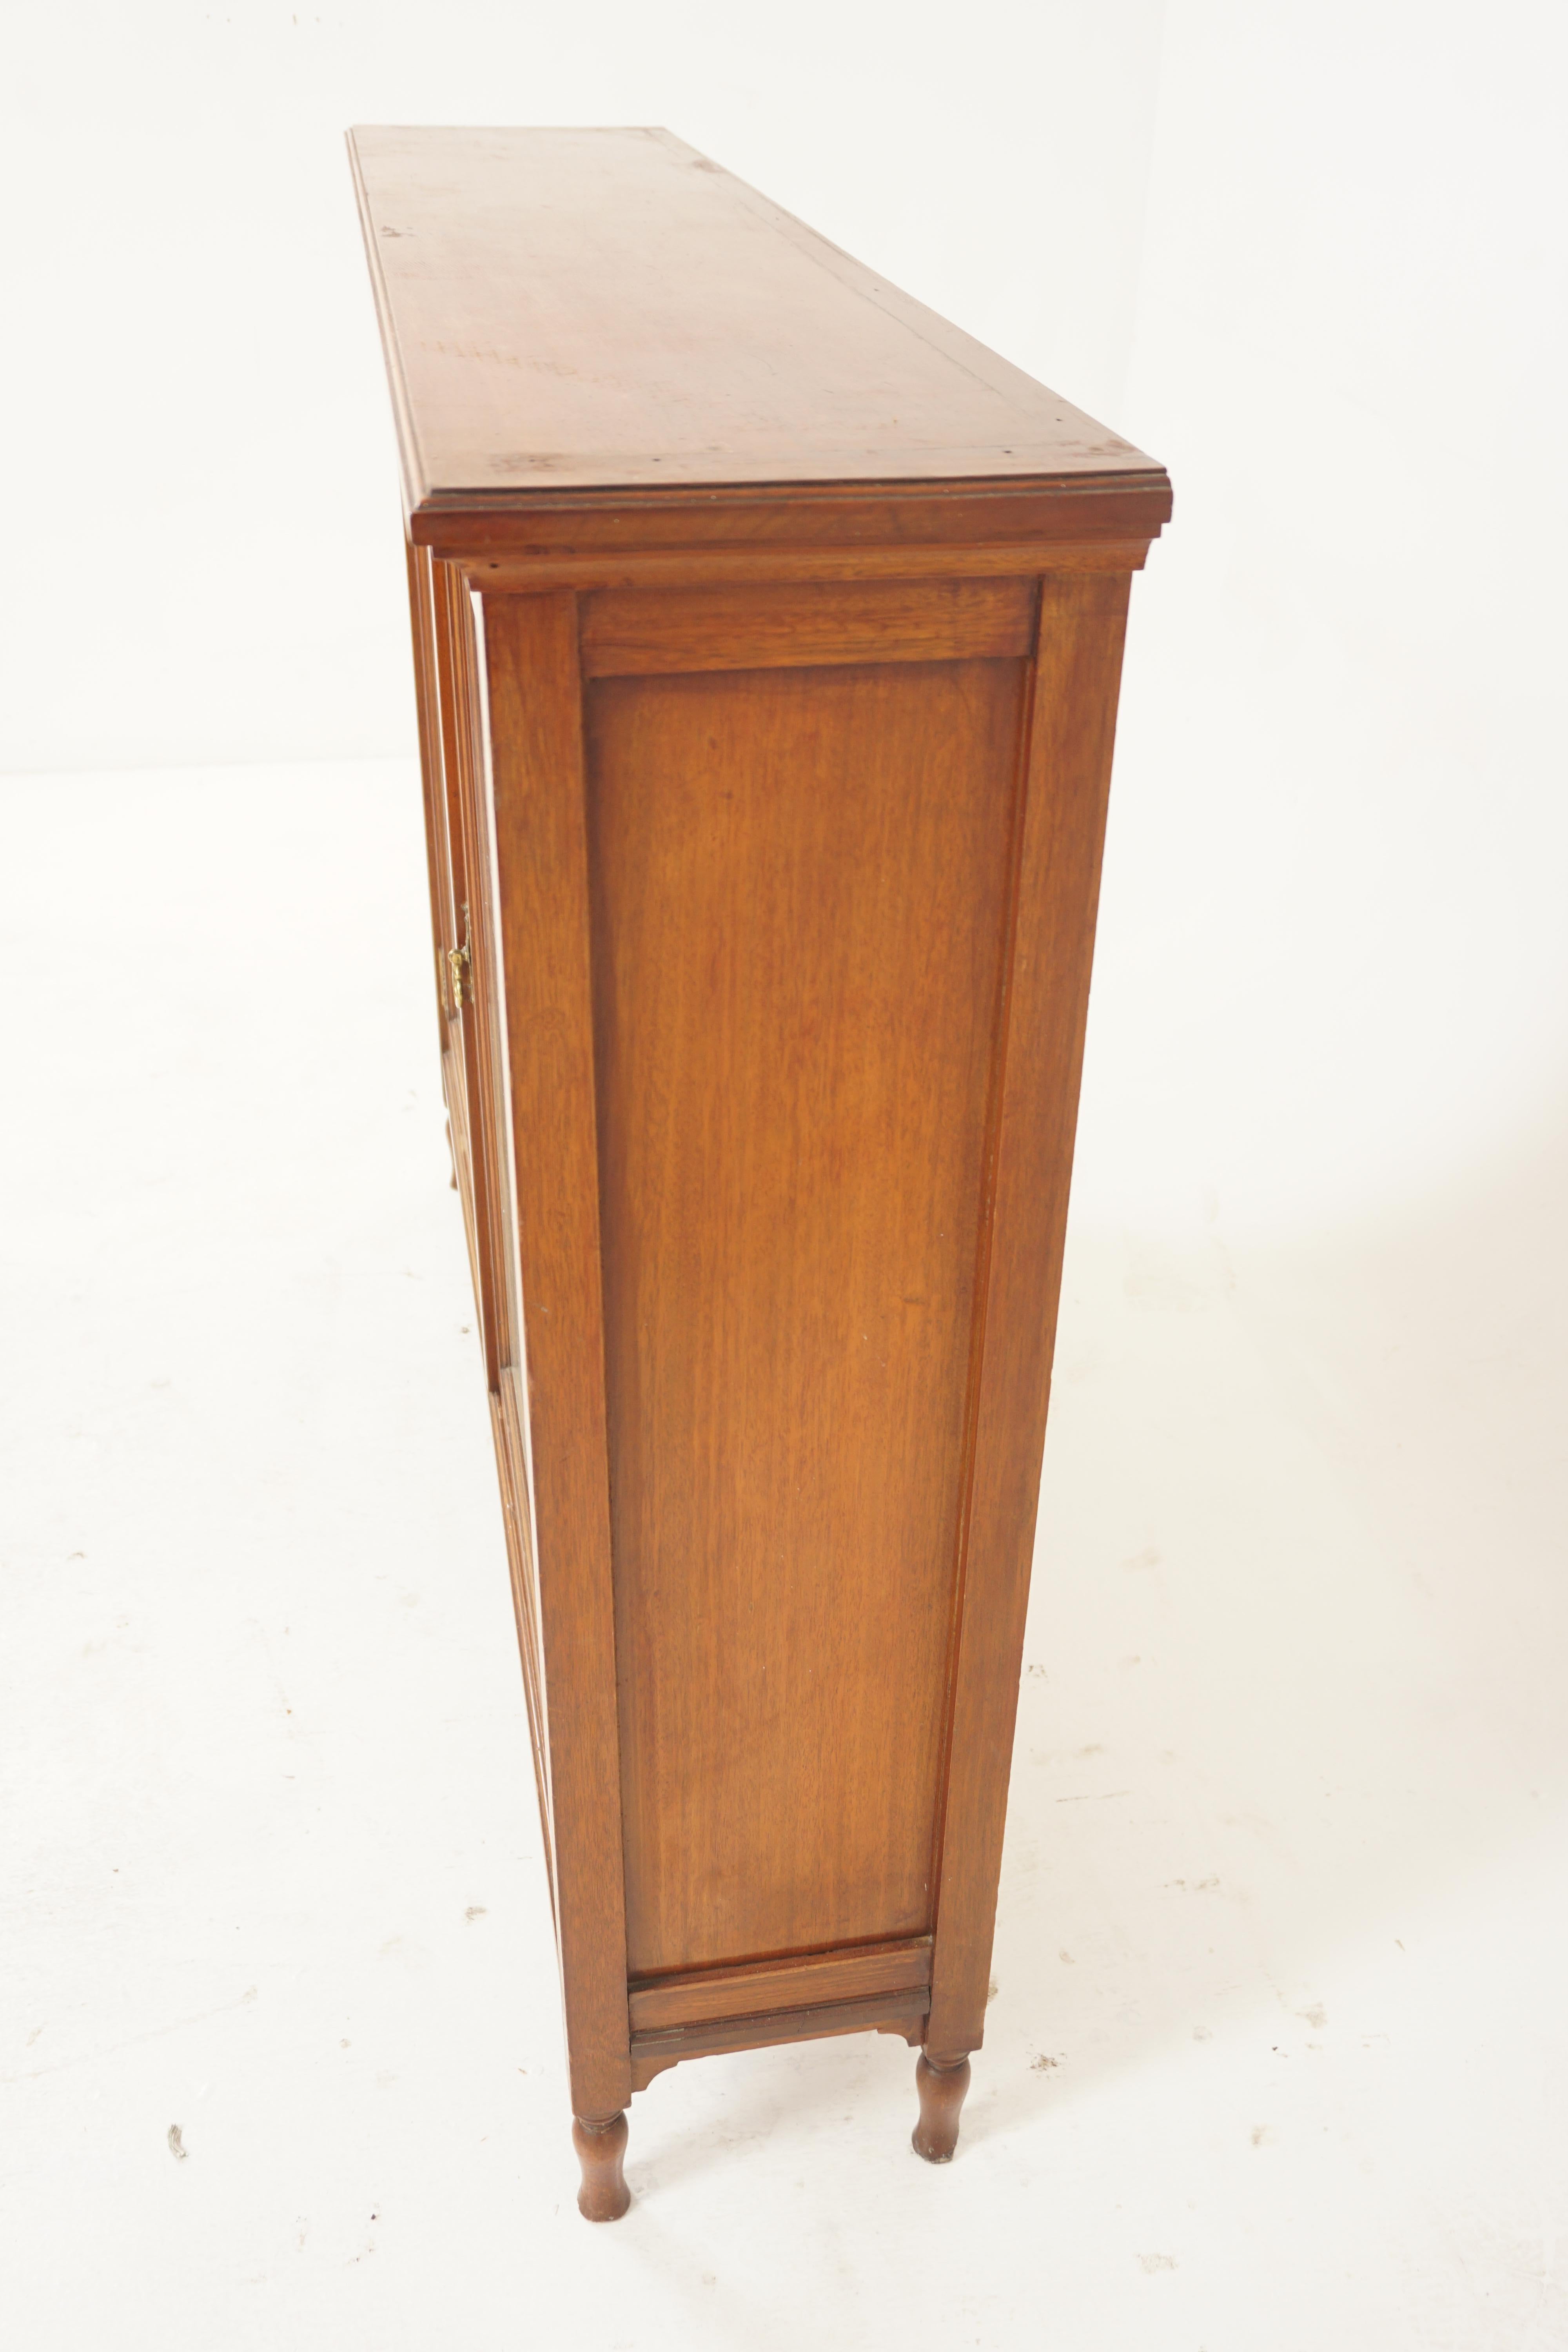 Early 20th Century Antique Arts & Crafts Walnut Bookcase, Display, Glass, Scotland 1890, H1010 For Sale